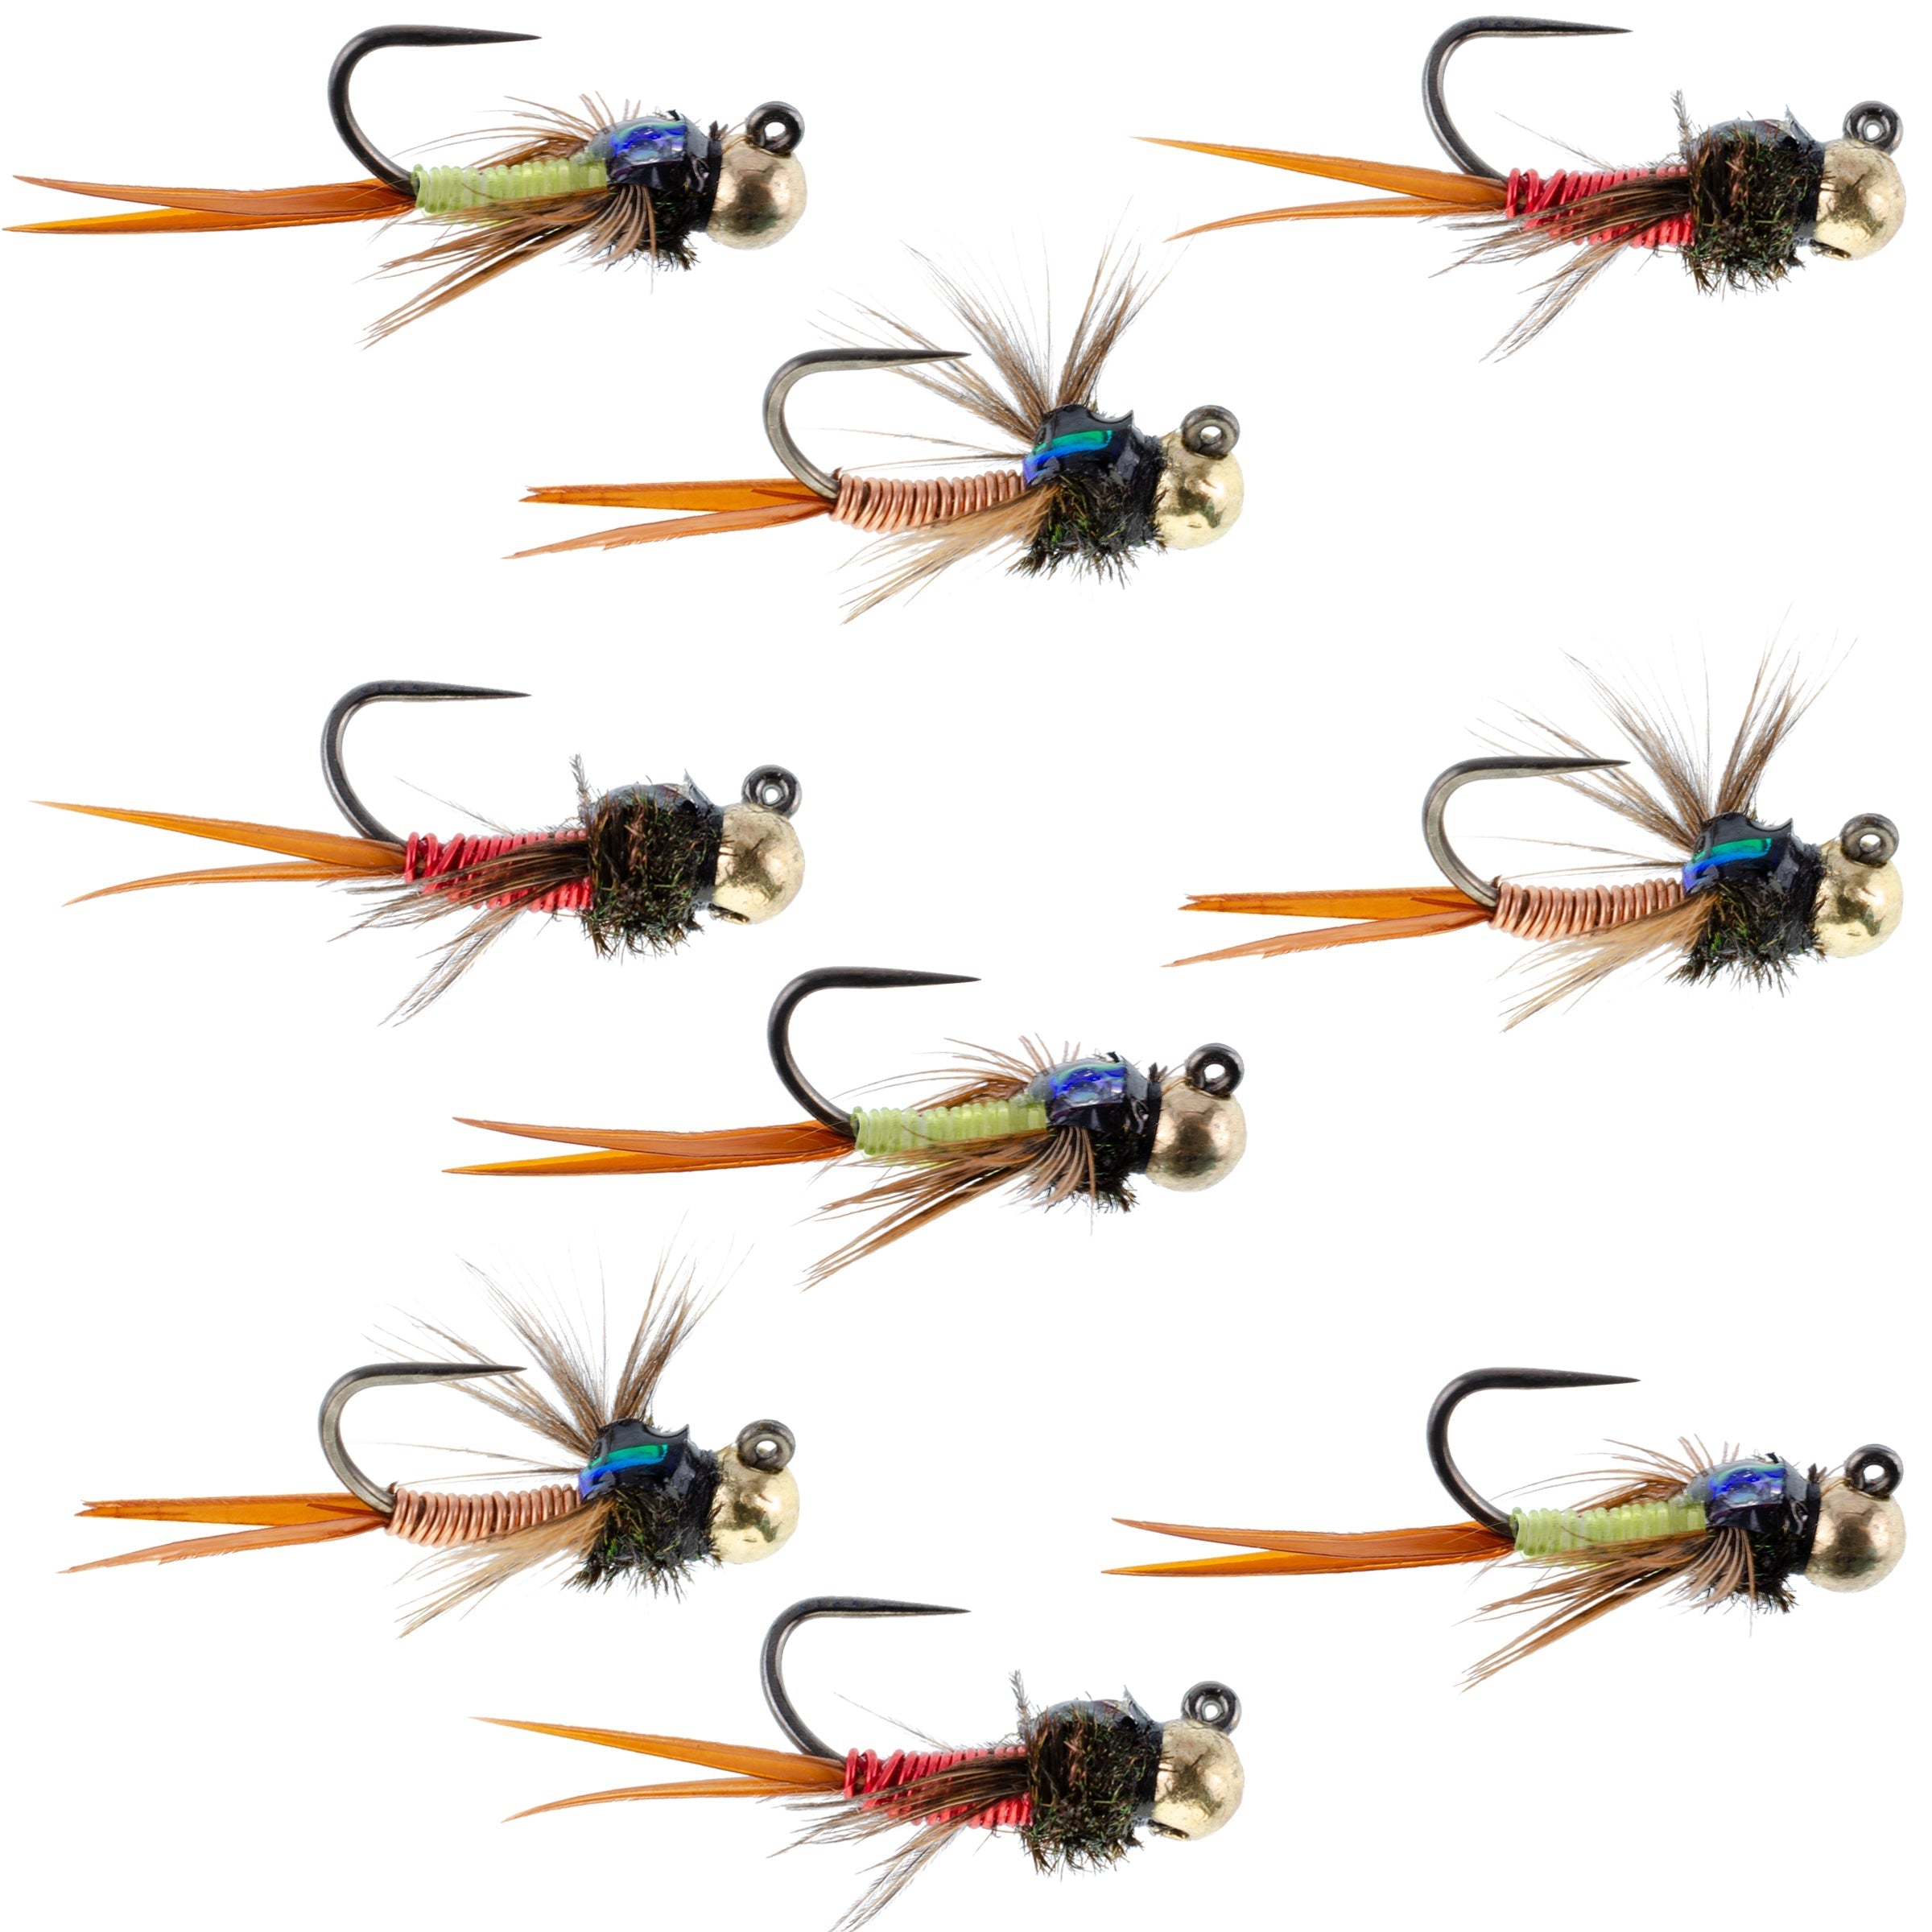 Tactical Tungsten Bead Head Copper John Euro Nymph Assortment Fly Fishing Flies - Collection of 9 Flies 3 Colors Hook Size 12